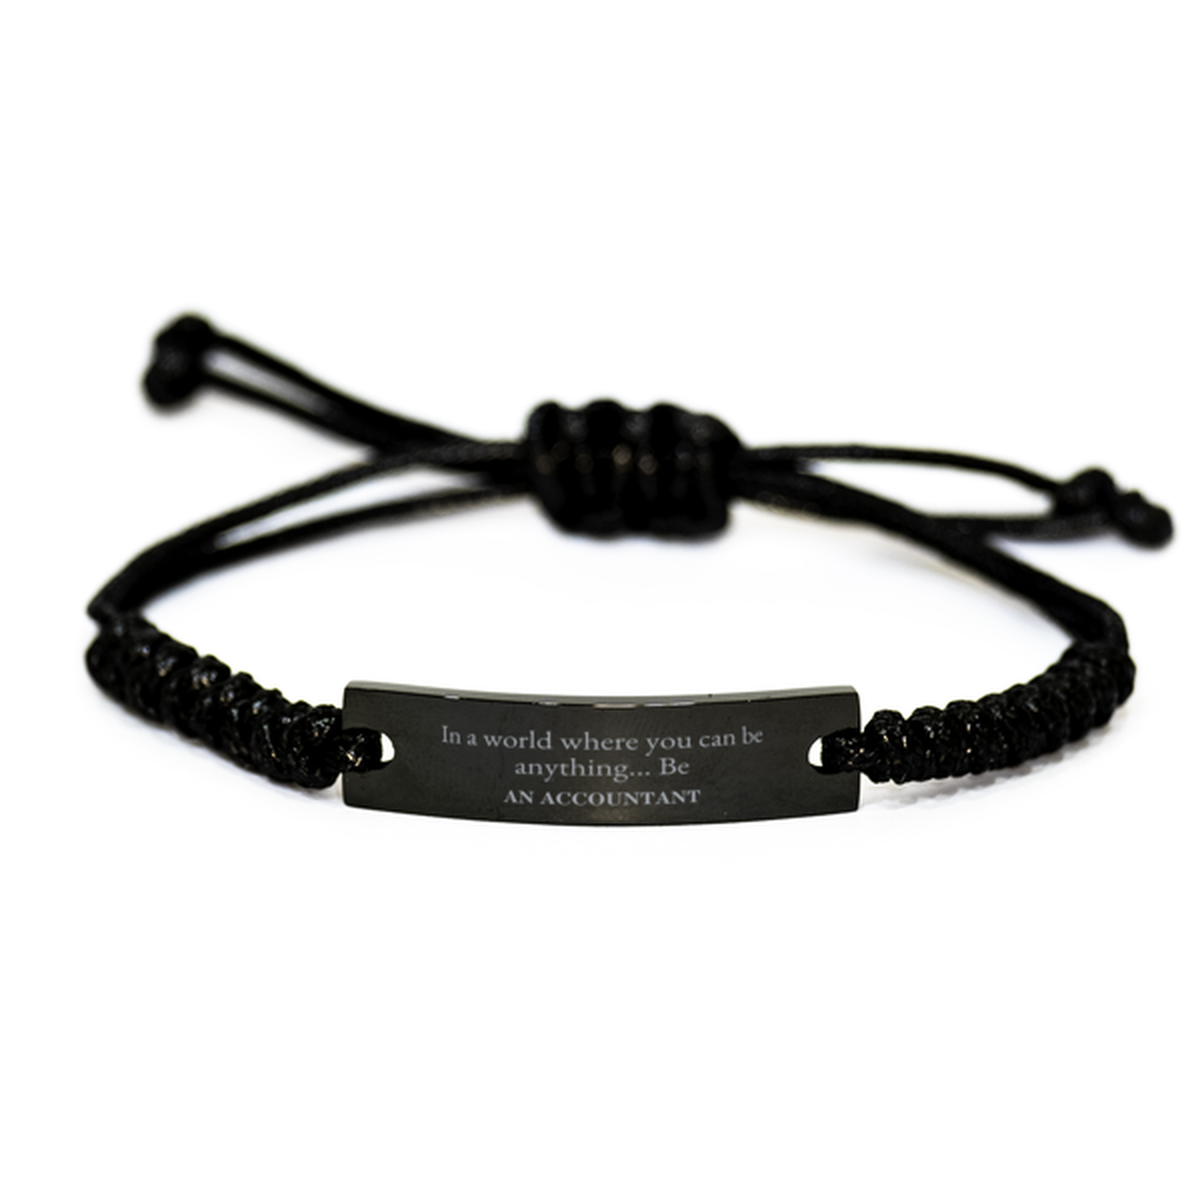 Gifts for Accountant, In a world where you can be anything, Appreciation Birthday Black Rope Bracelet for Men, Women, Friends, Coworkers